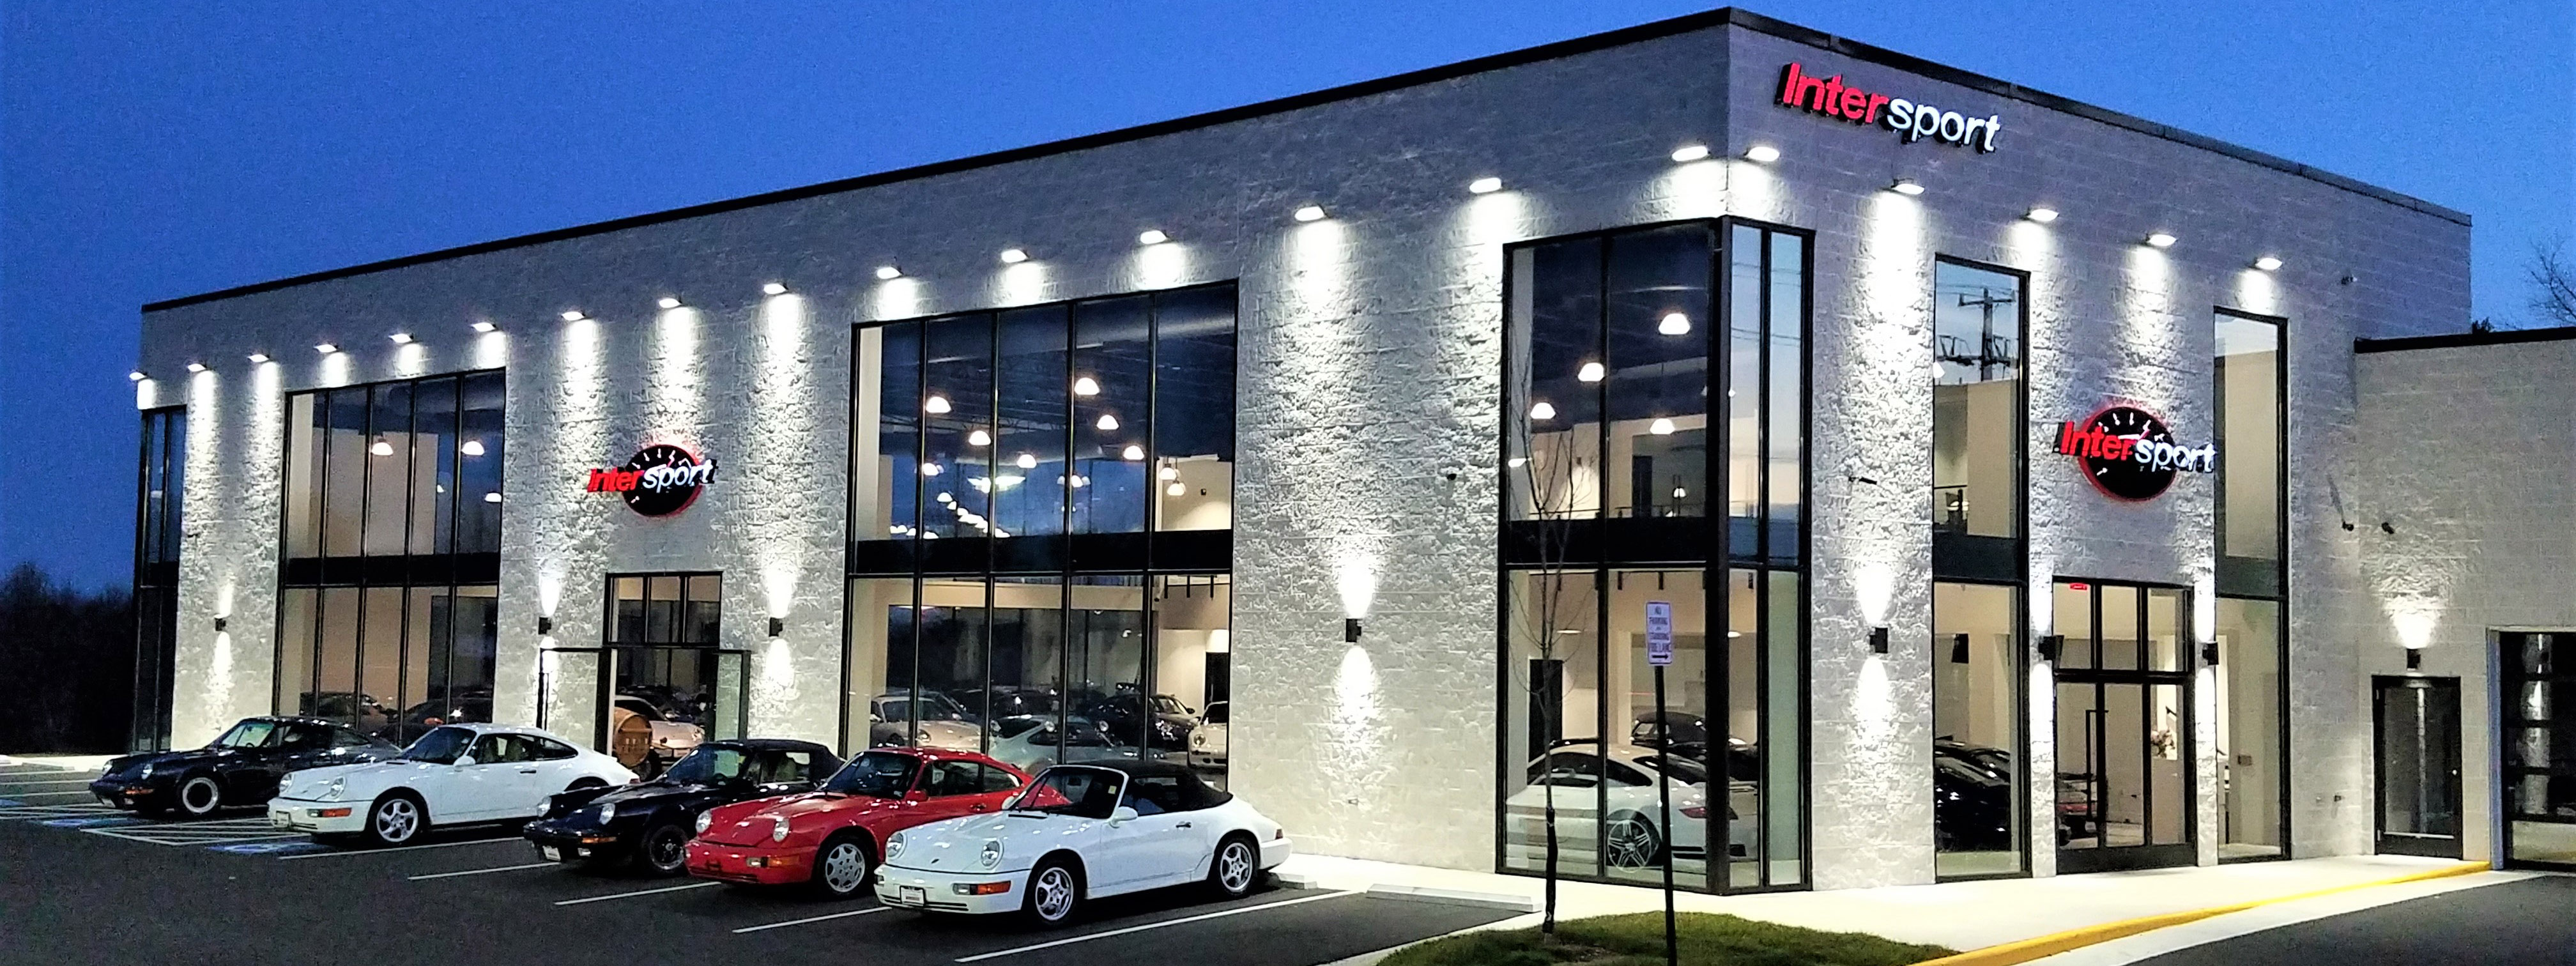 Intersport Performance buys and sells British, Italian and German sports cars, SUV's and luxury vehicles. Visit our showroom in Loudoun, 15 mins north of Washington Dulles Airport on Route 7 and Ashburn Road in Ashburn VA 